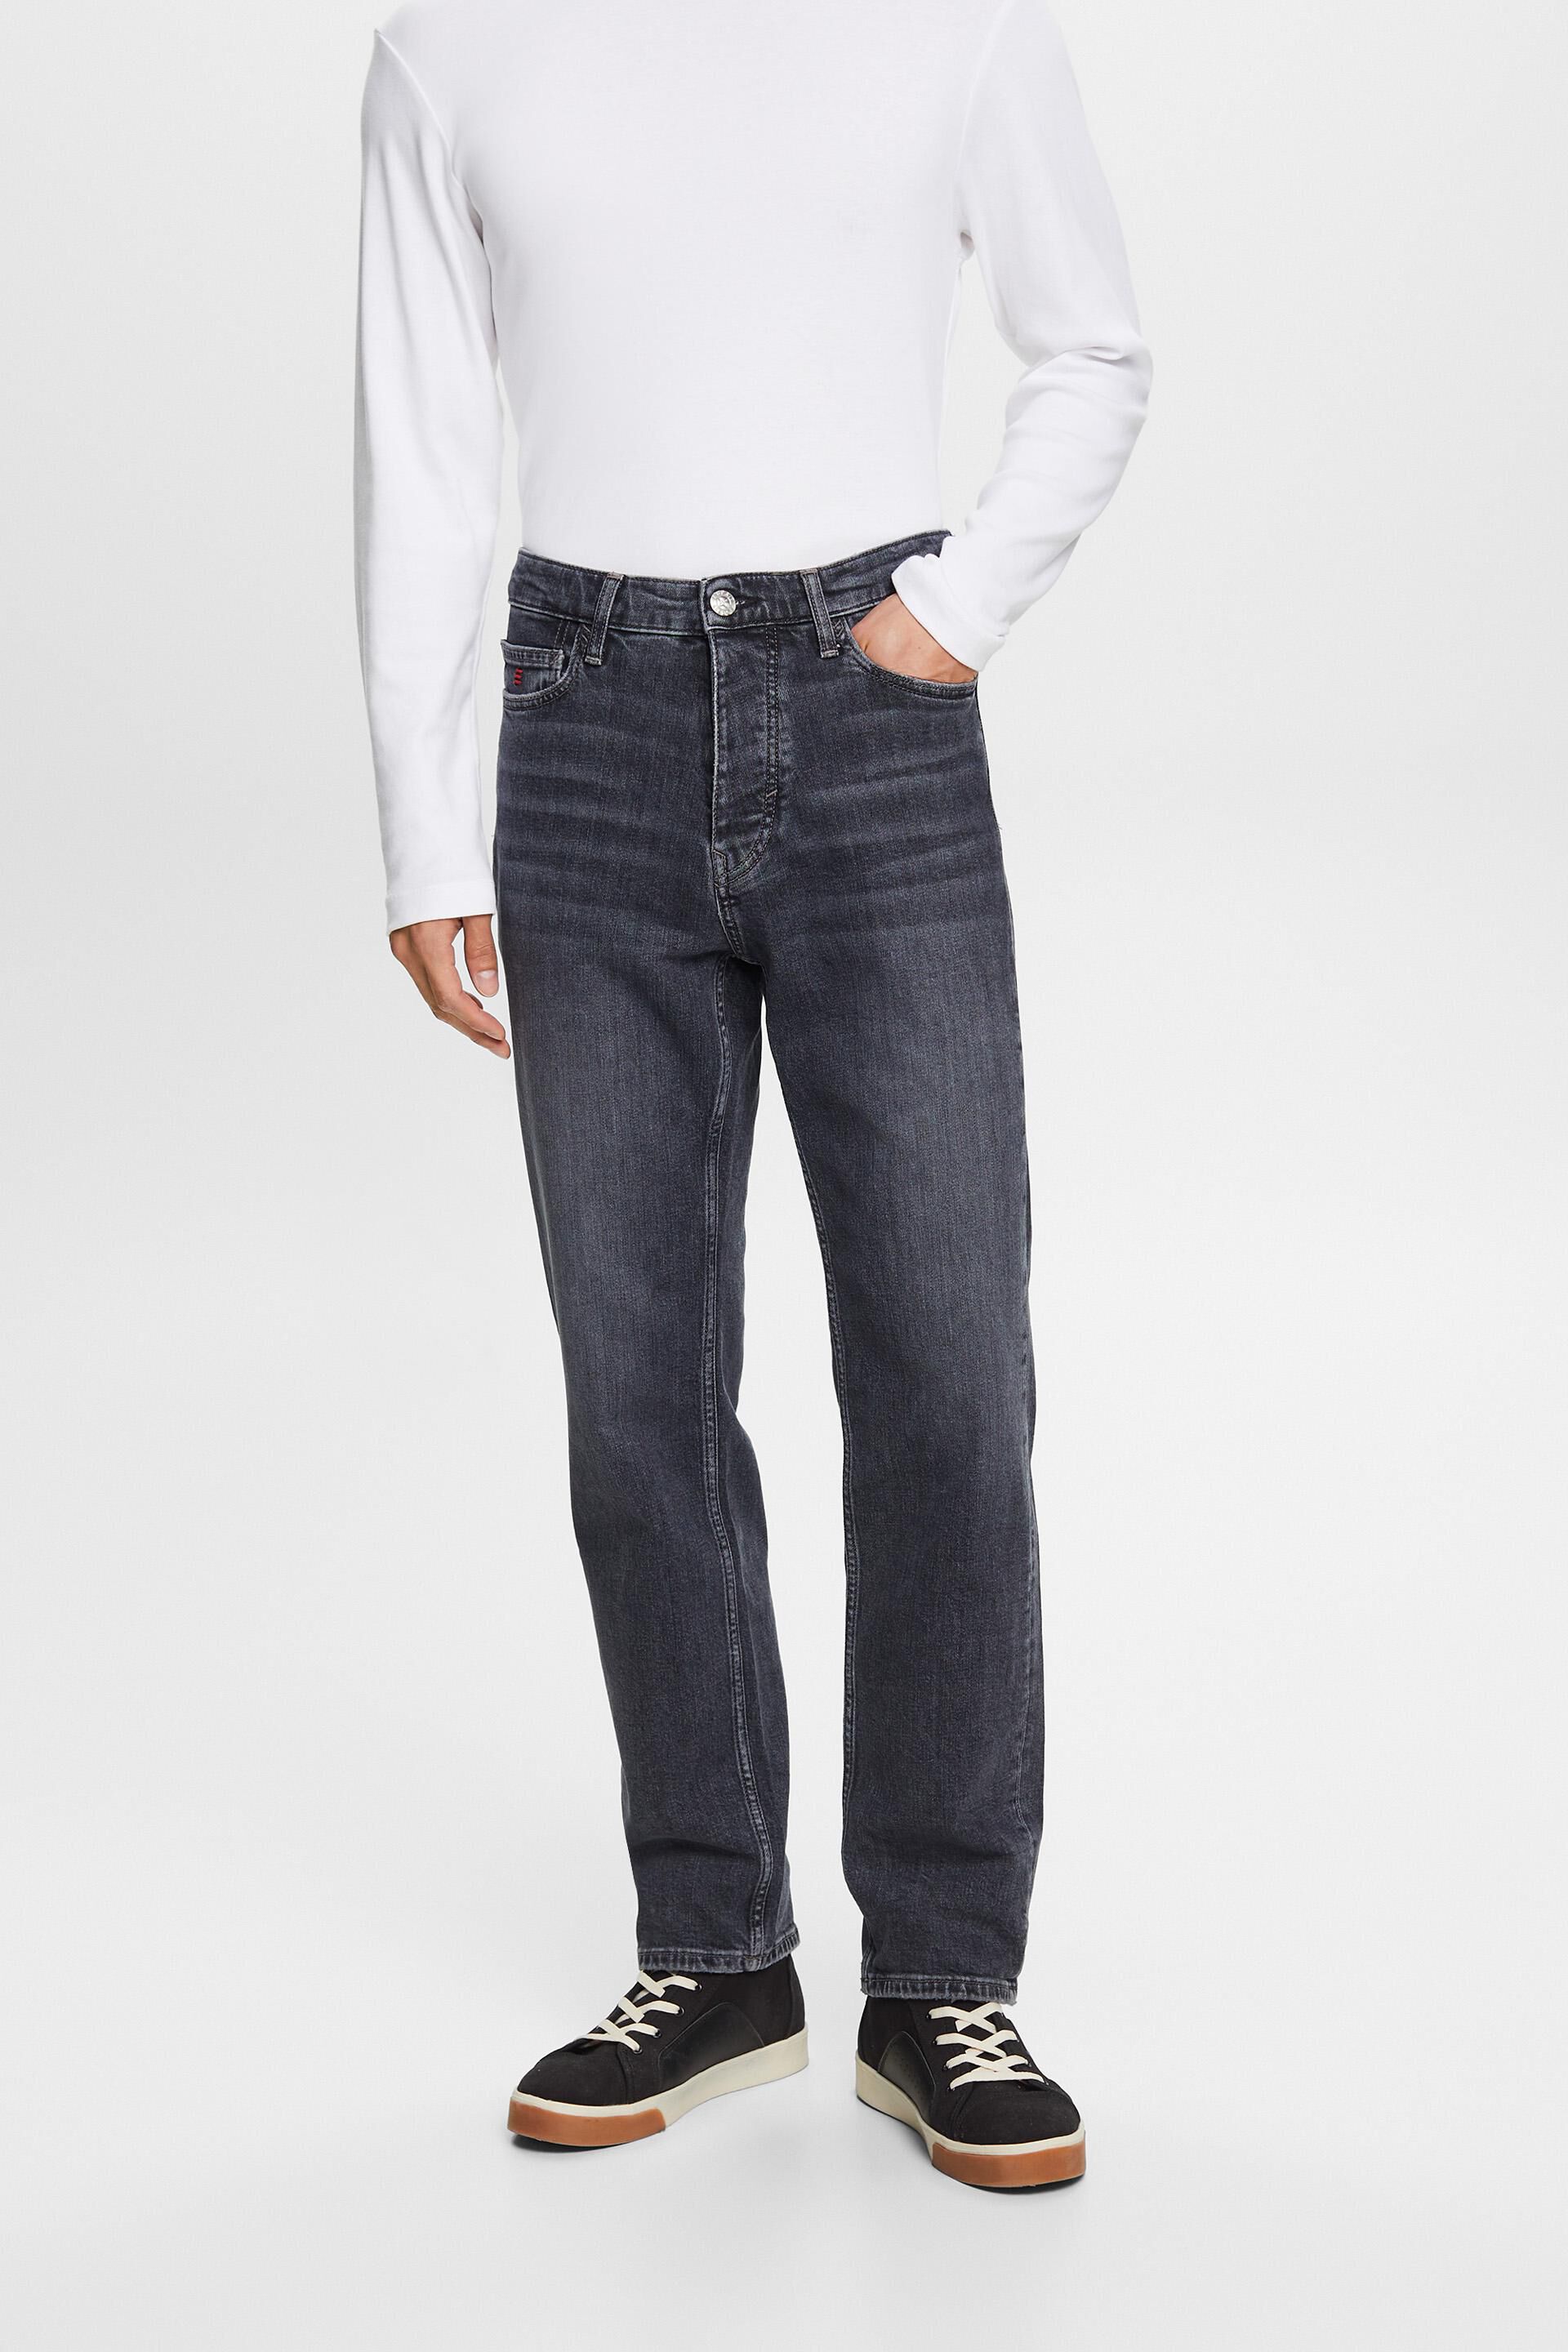 Esprit Jeans Relaxed Straight-Leg